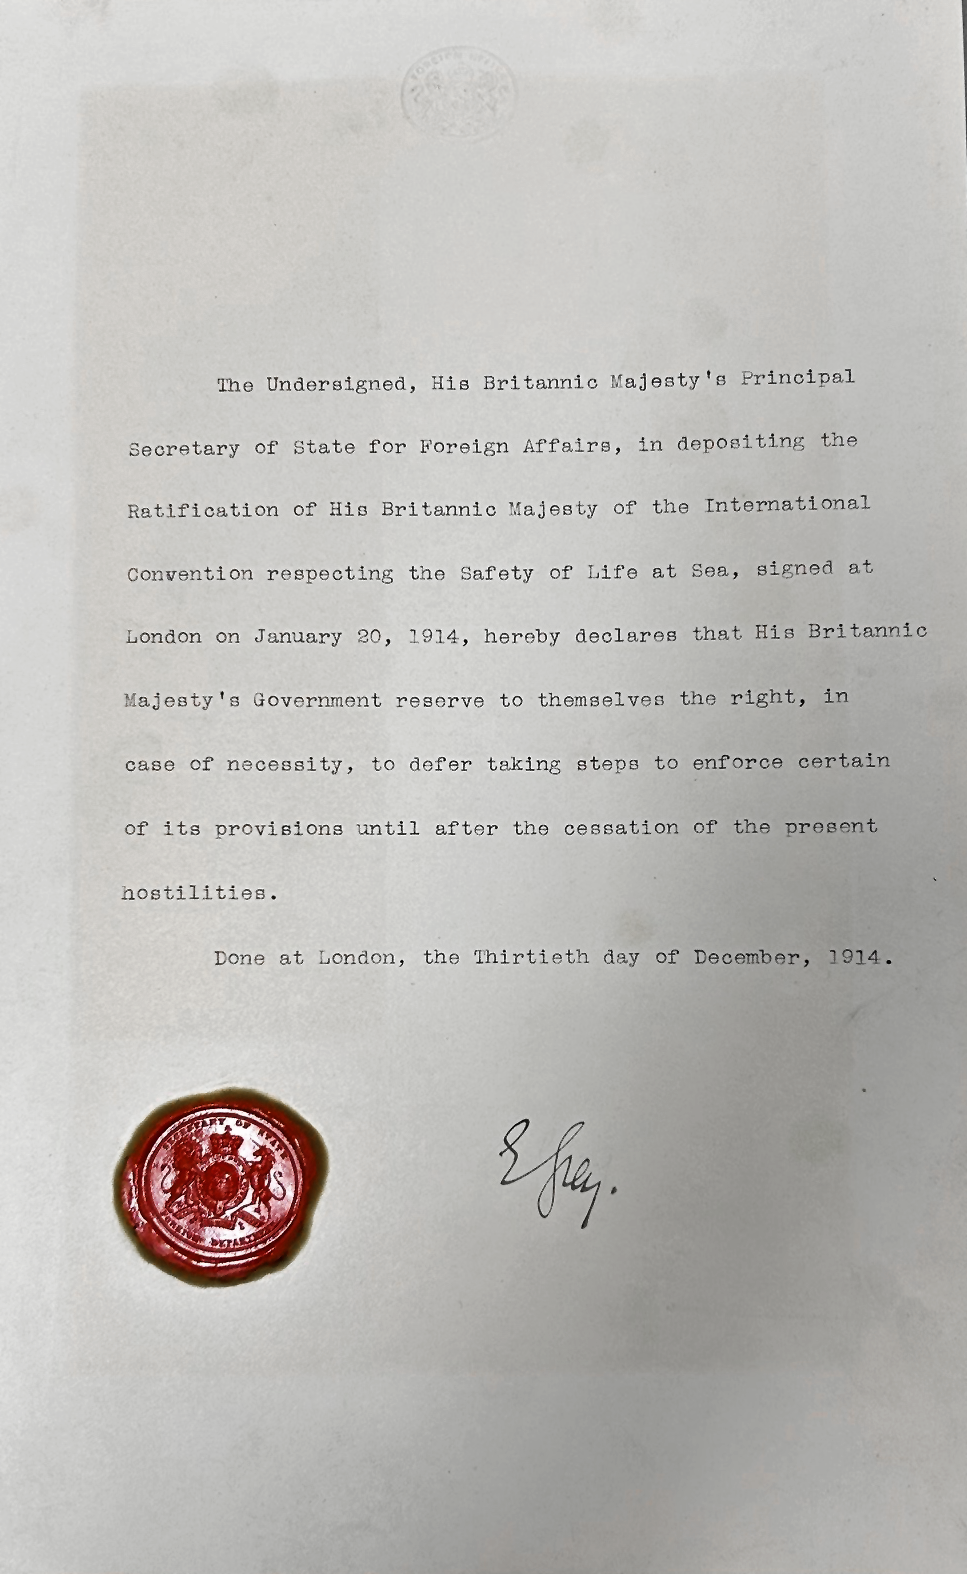 Handwritten signature saying 'E Grey' and red wax seal on a printed page of the document.